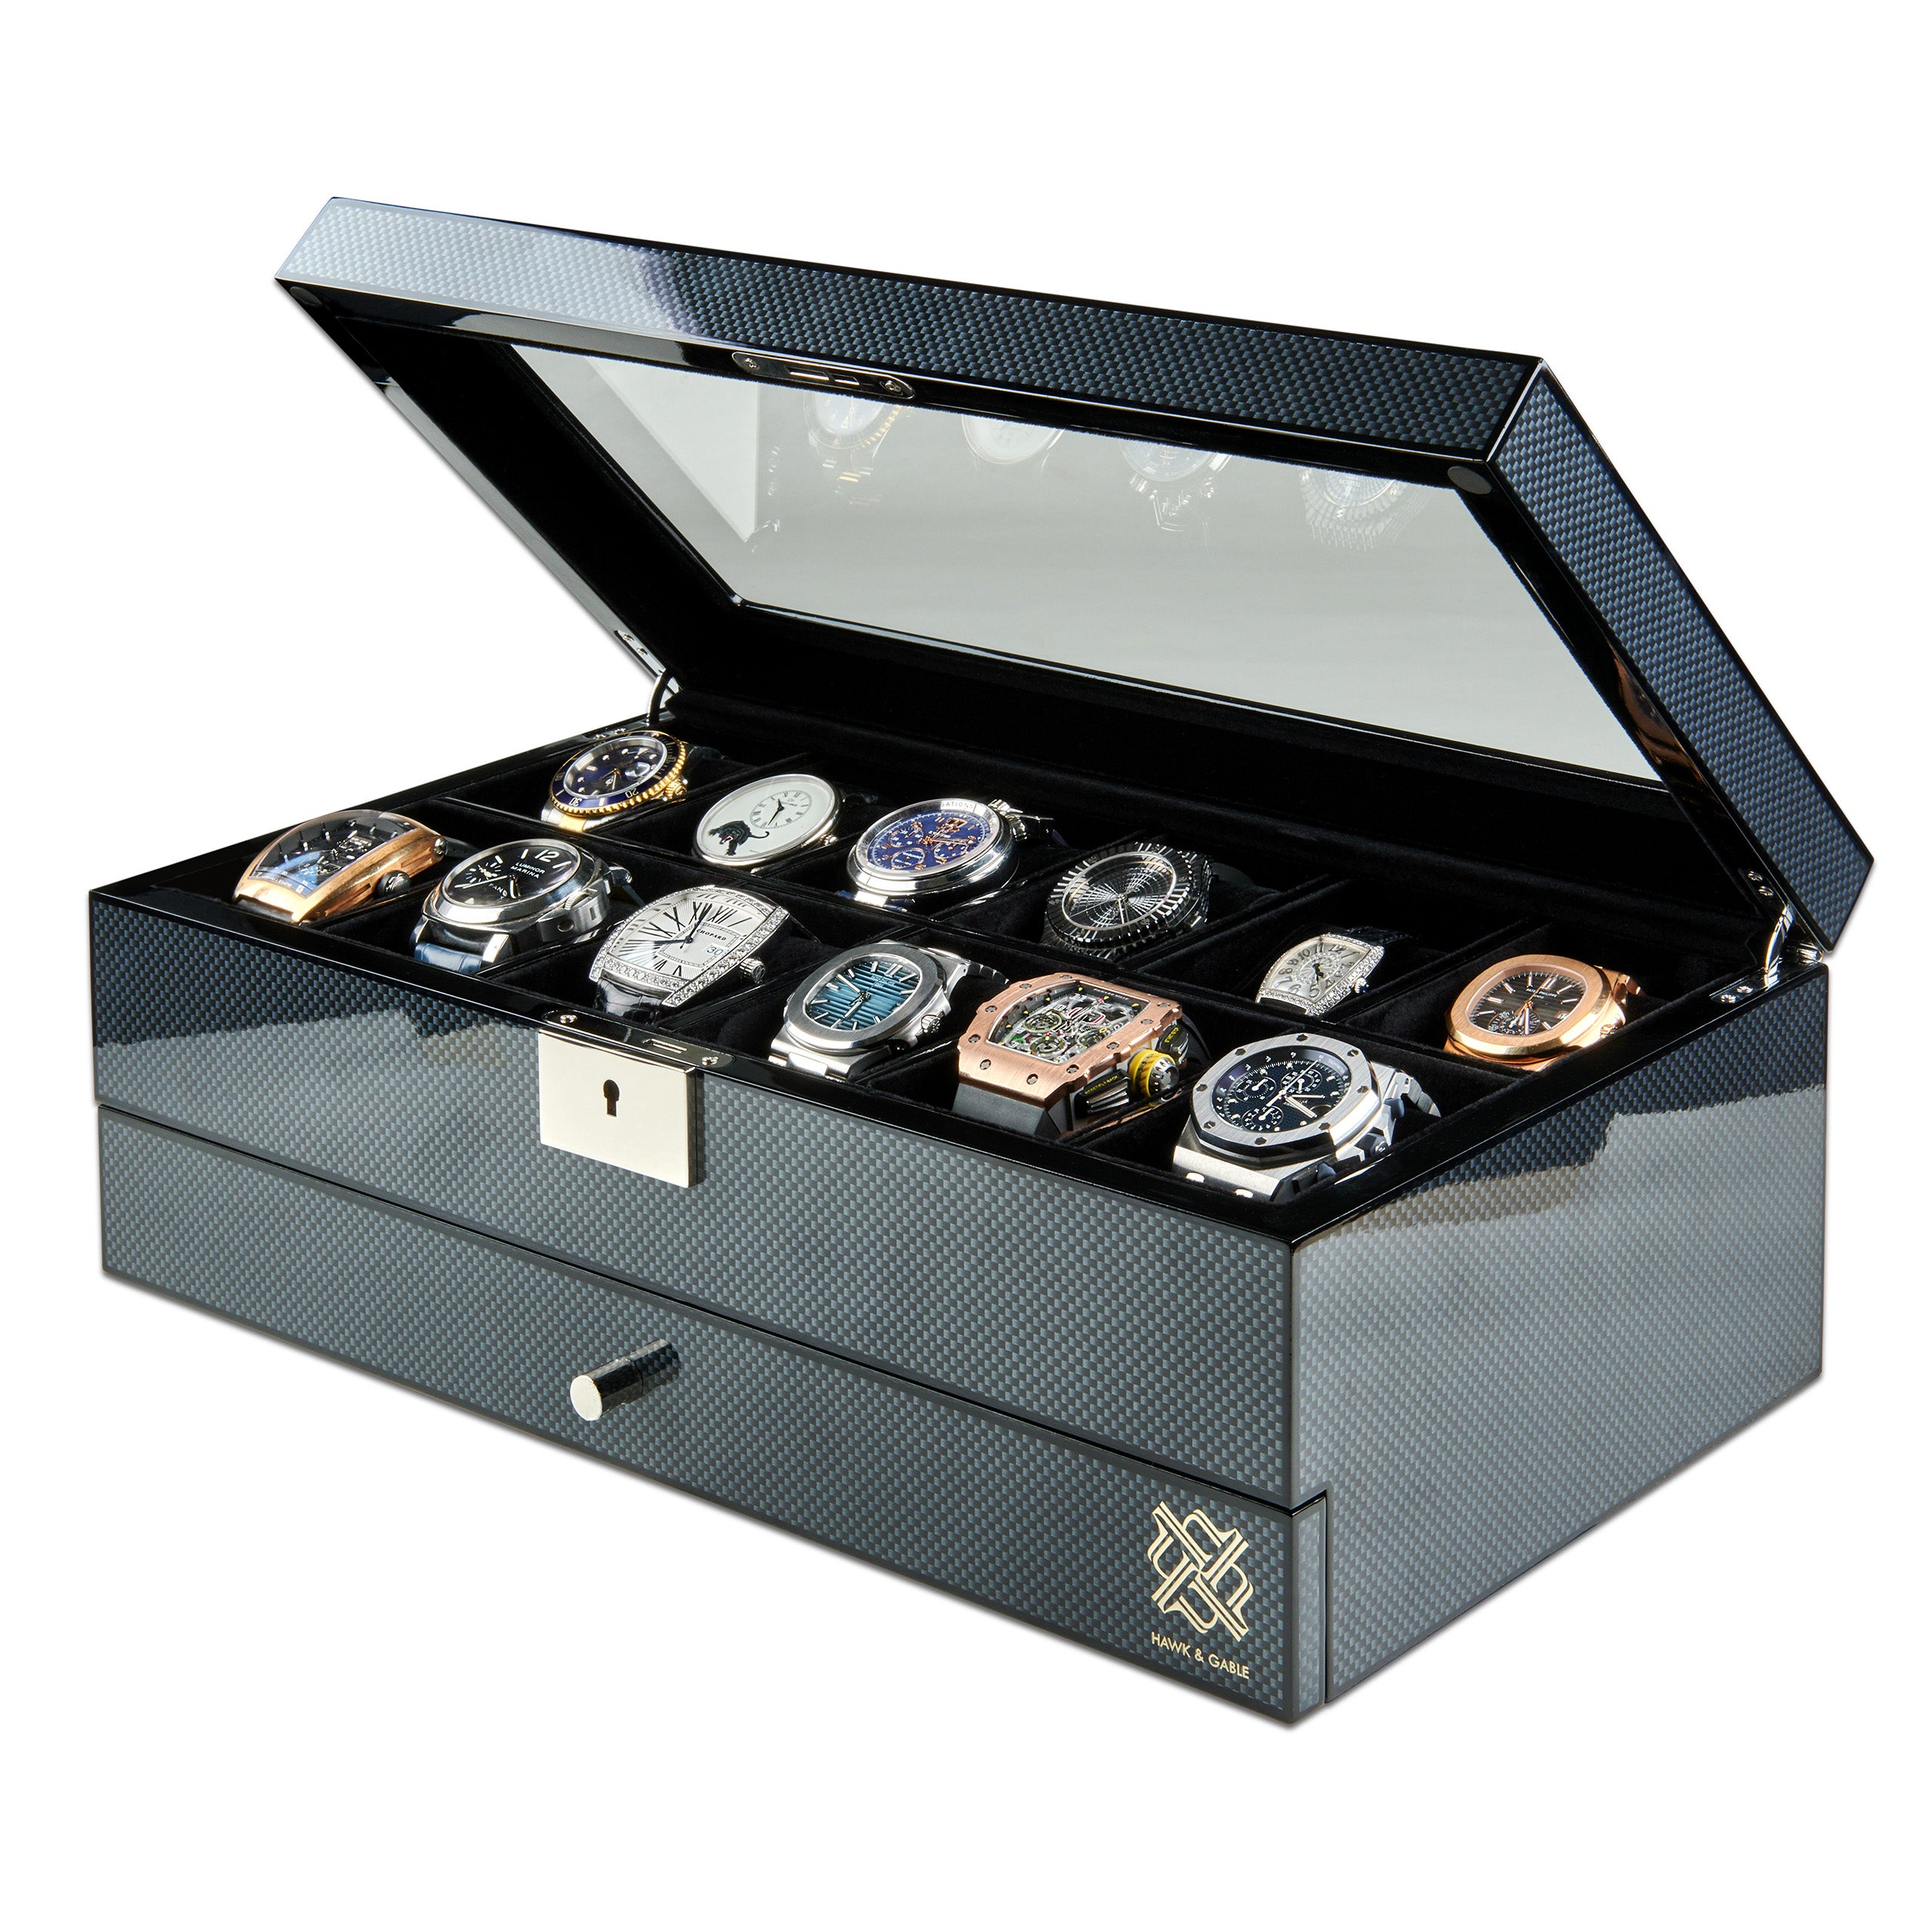 Watch Box Organizer for Men with Valet Drawer - Luxury 12 Slot Watch Case with Glass Display and Lock | Mens Wrist Watches Jewelry Box | Large 15.5